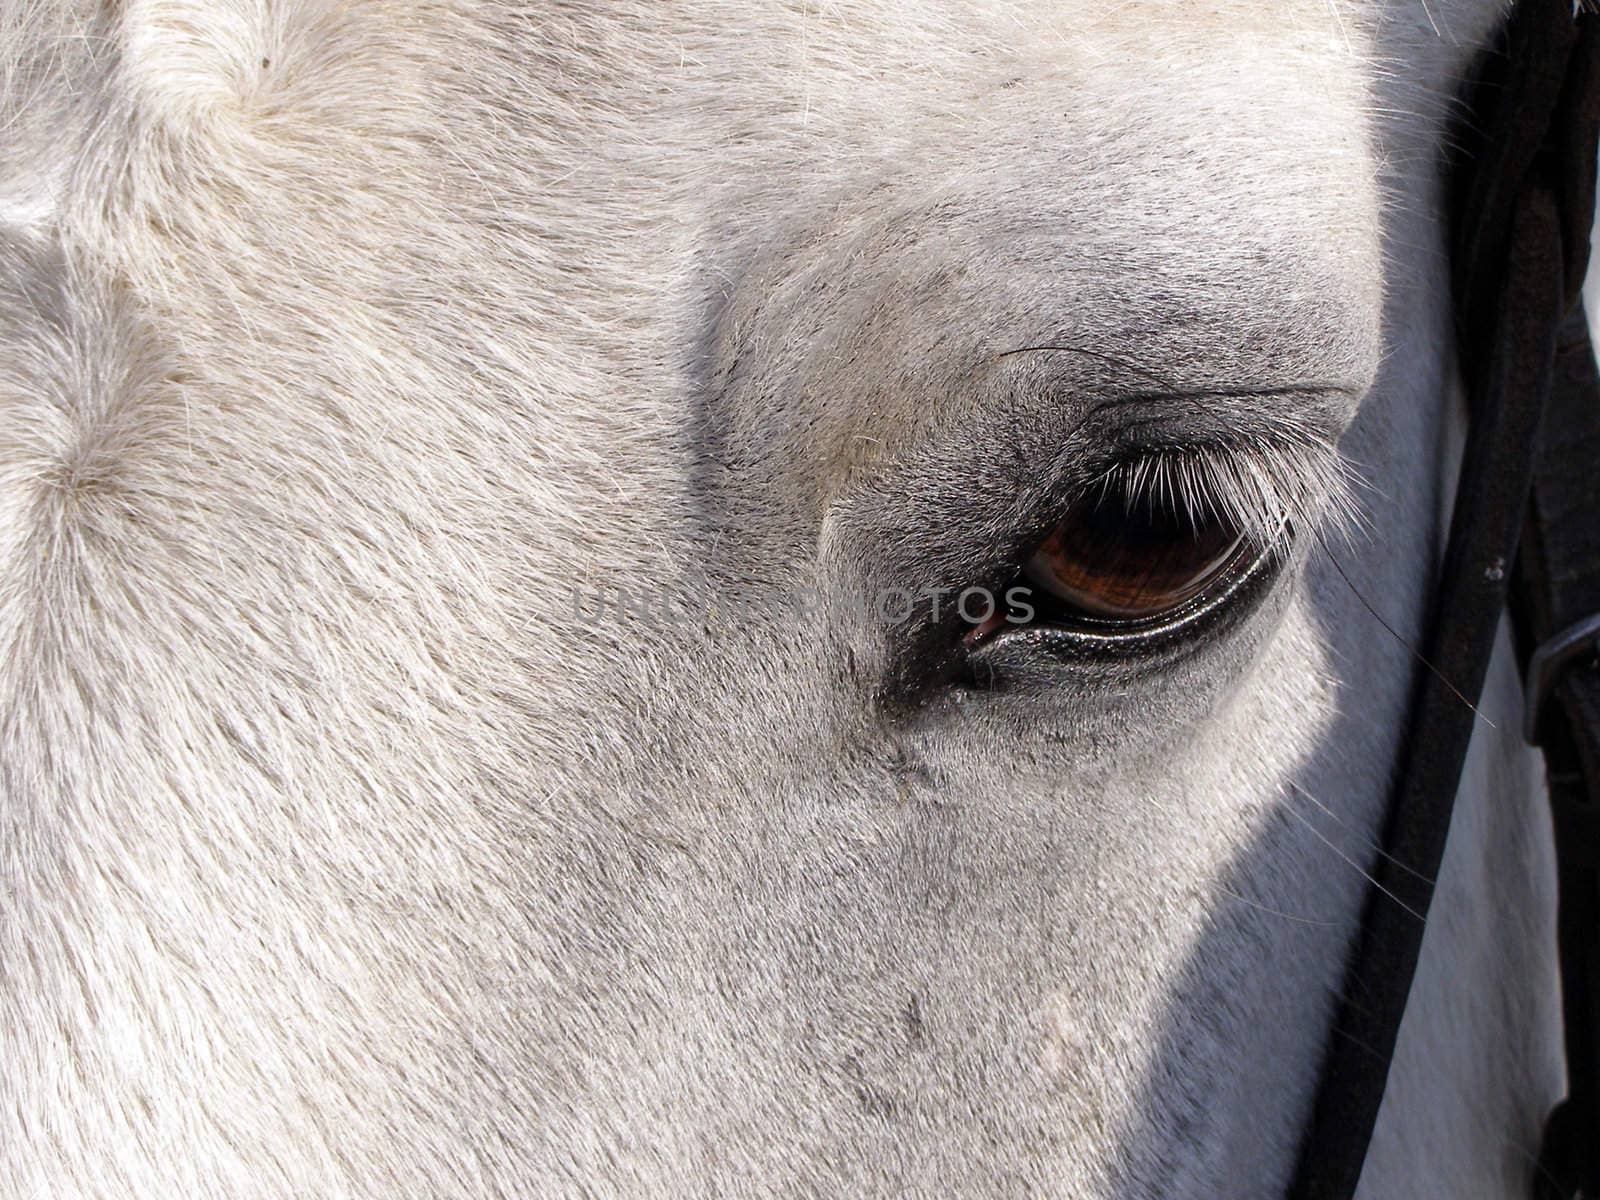 Eyes of the horse 1 by Clarushka